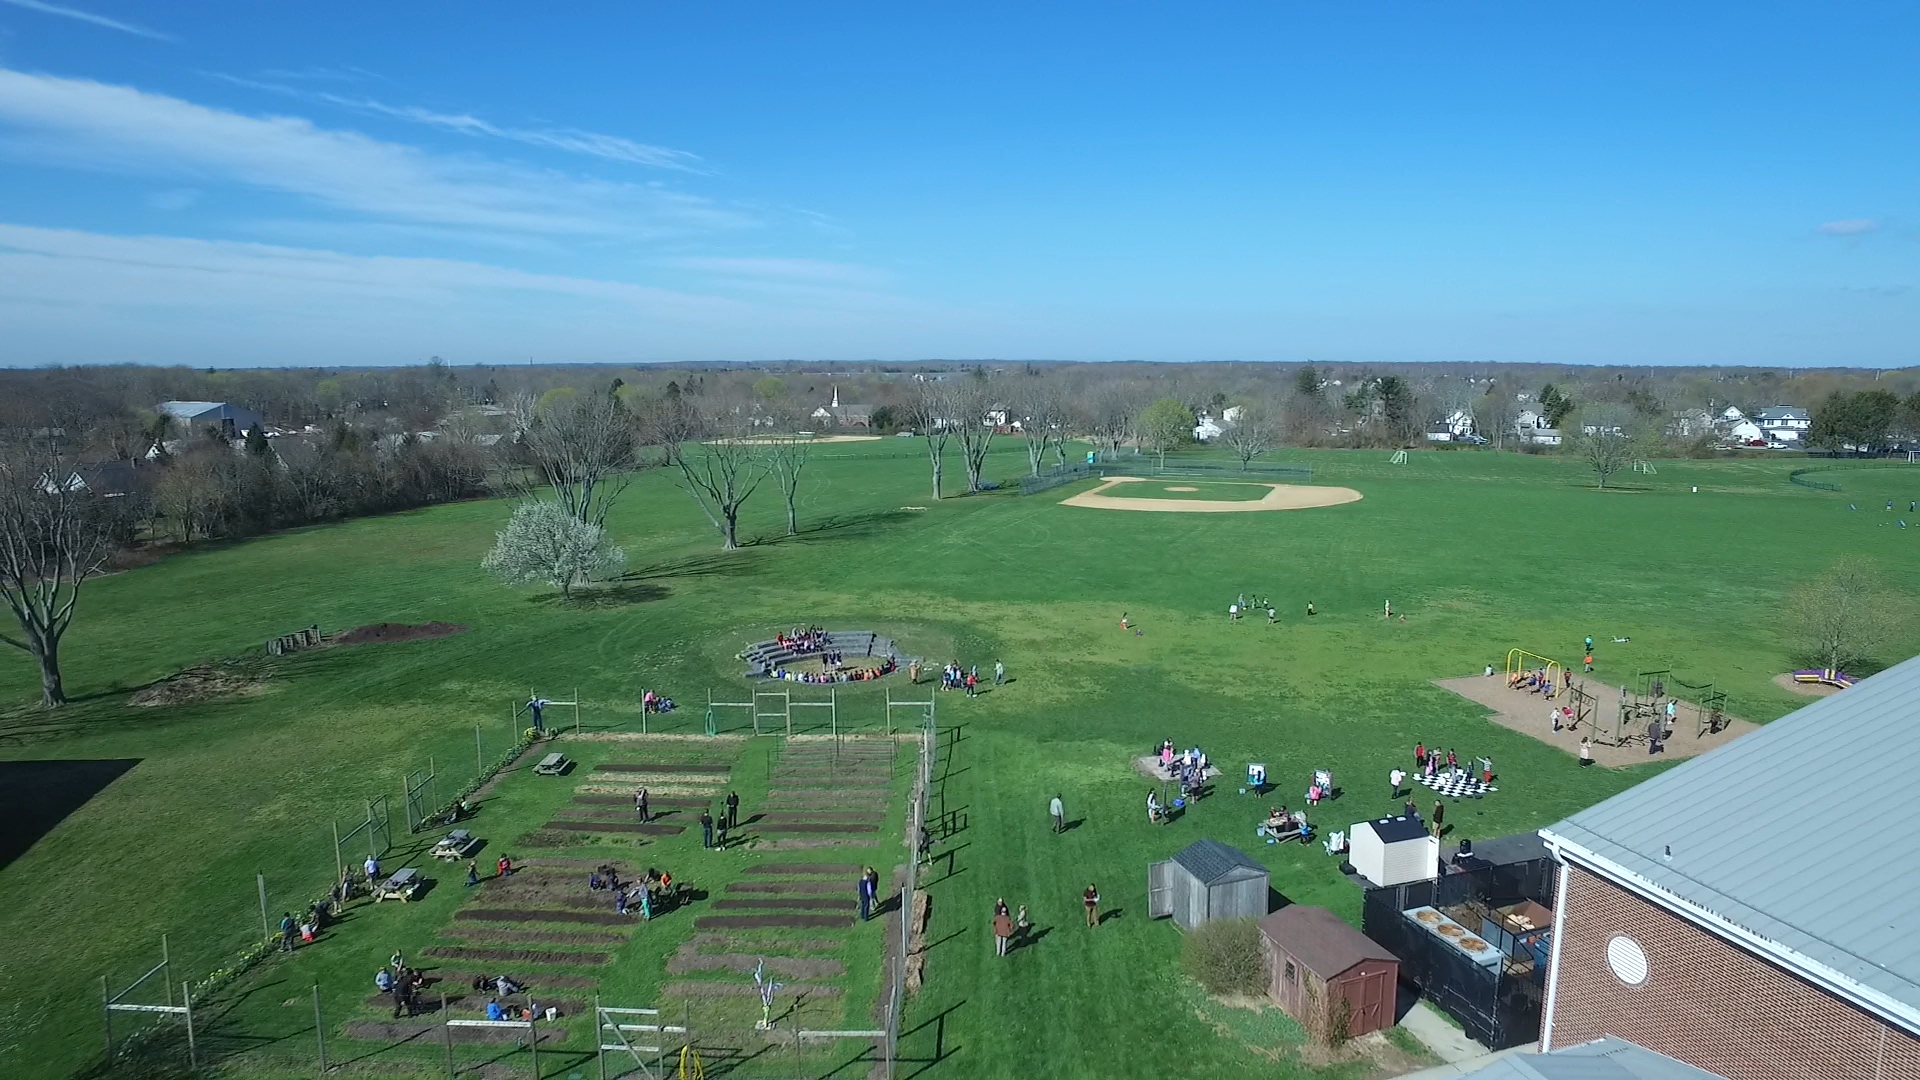 An aerial view of Tuesday's recess from aerial videographer Andrew LePre. (Credit: LePre Media)